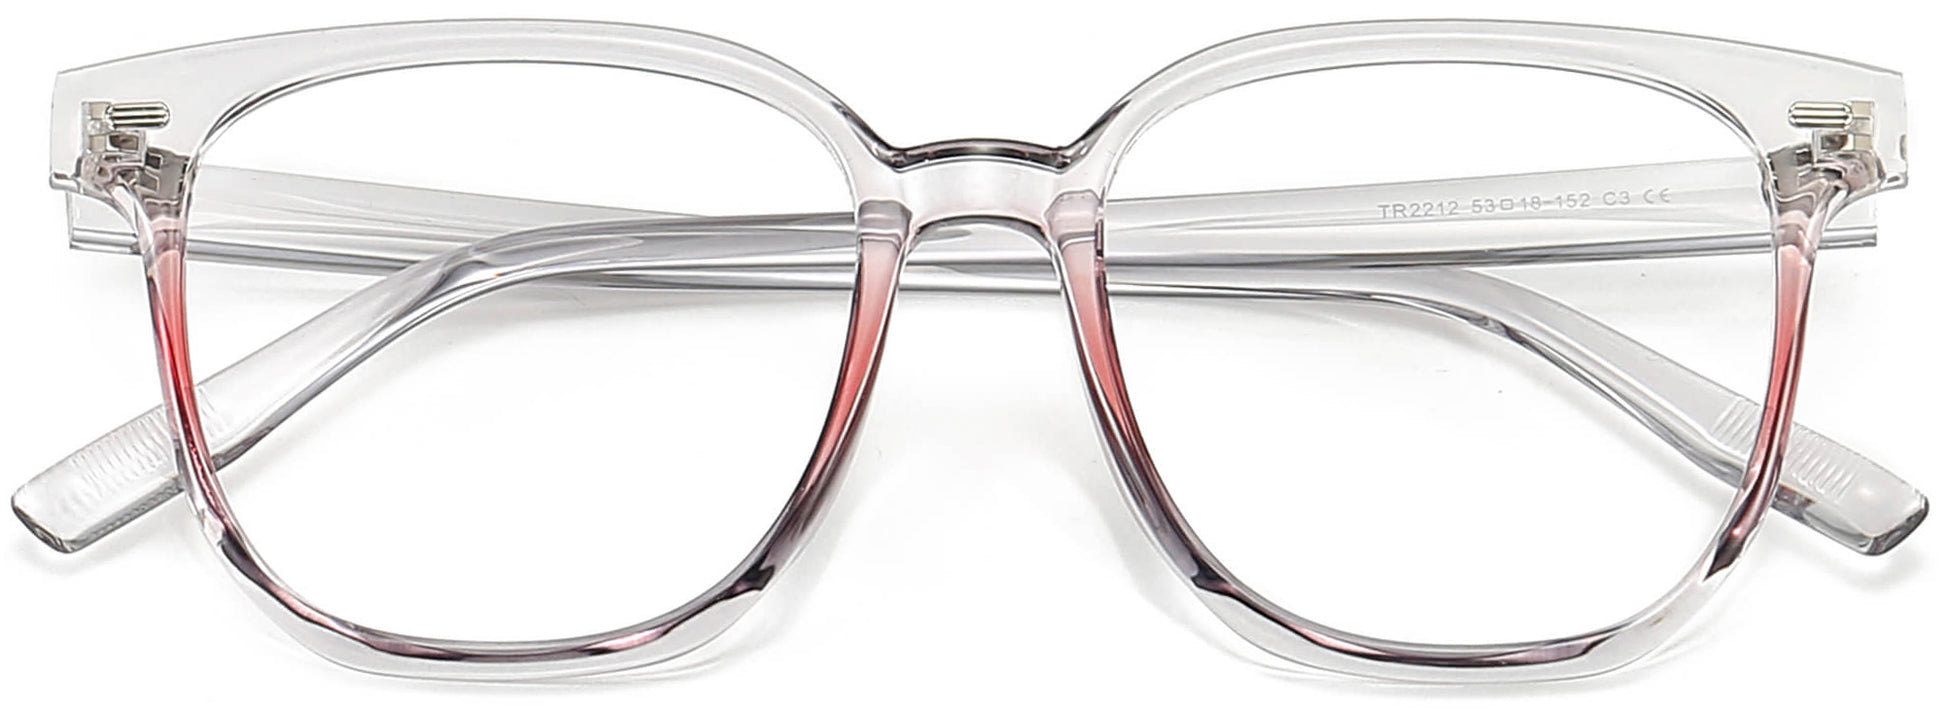 Madelynn Square Gray Eyeglasses from ANRRI, closed view